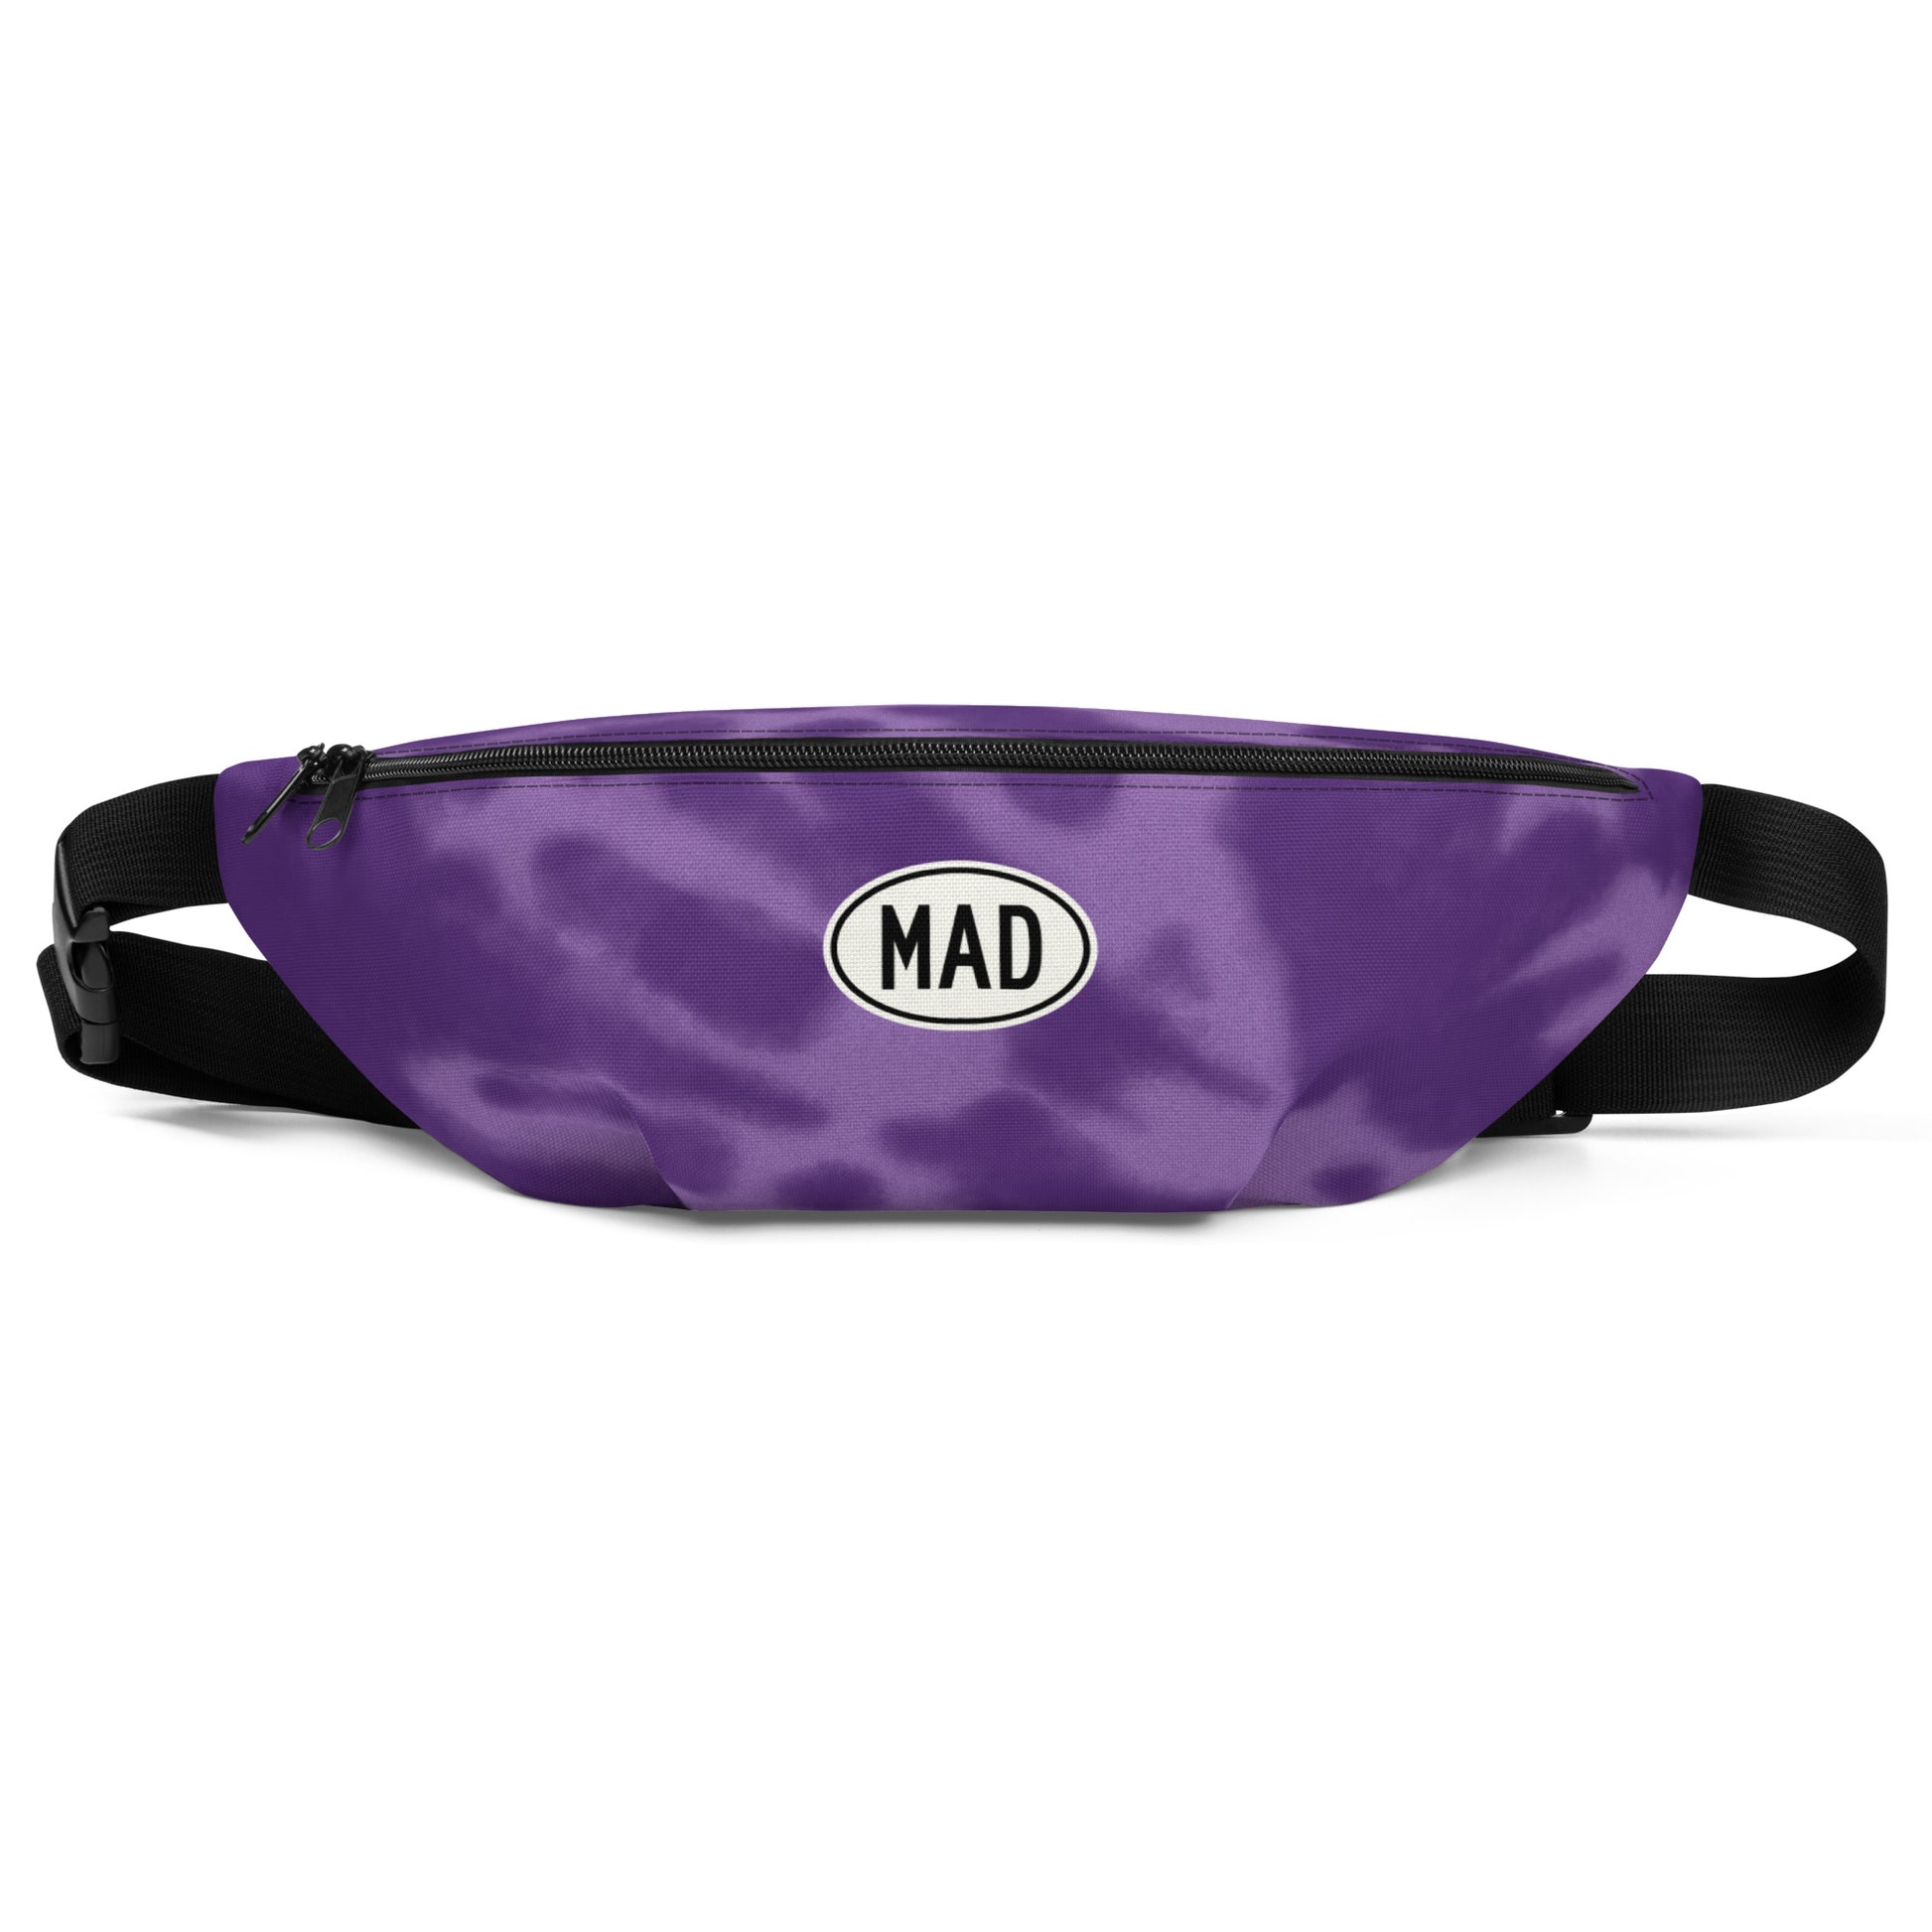 Travel Gift Fanny Pack - Purple Tie-Dye • MAD Madrid • YHM Designs - Image 01